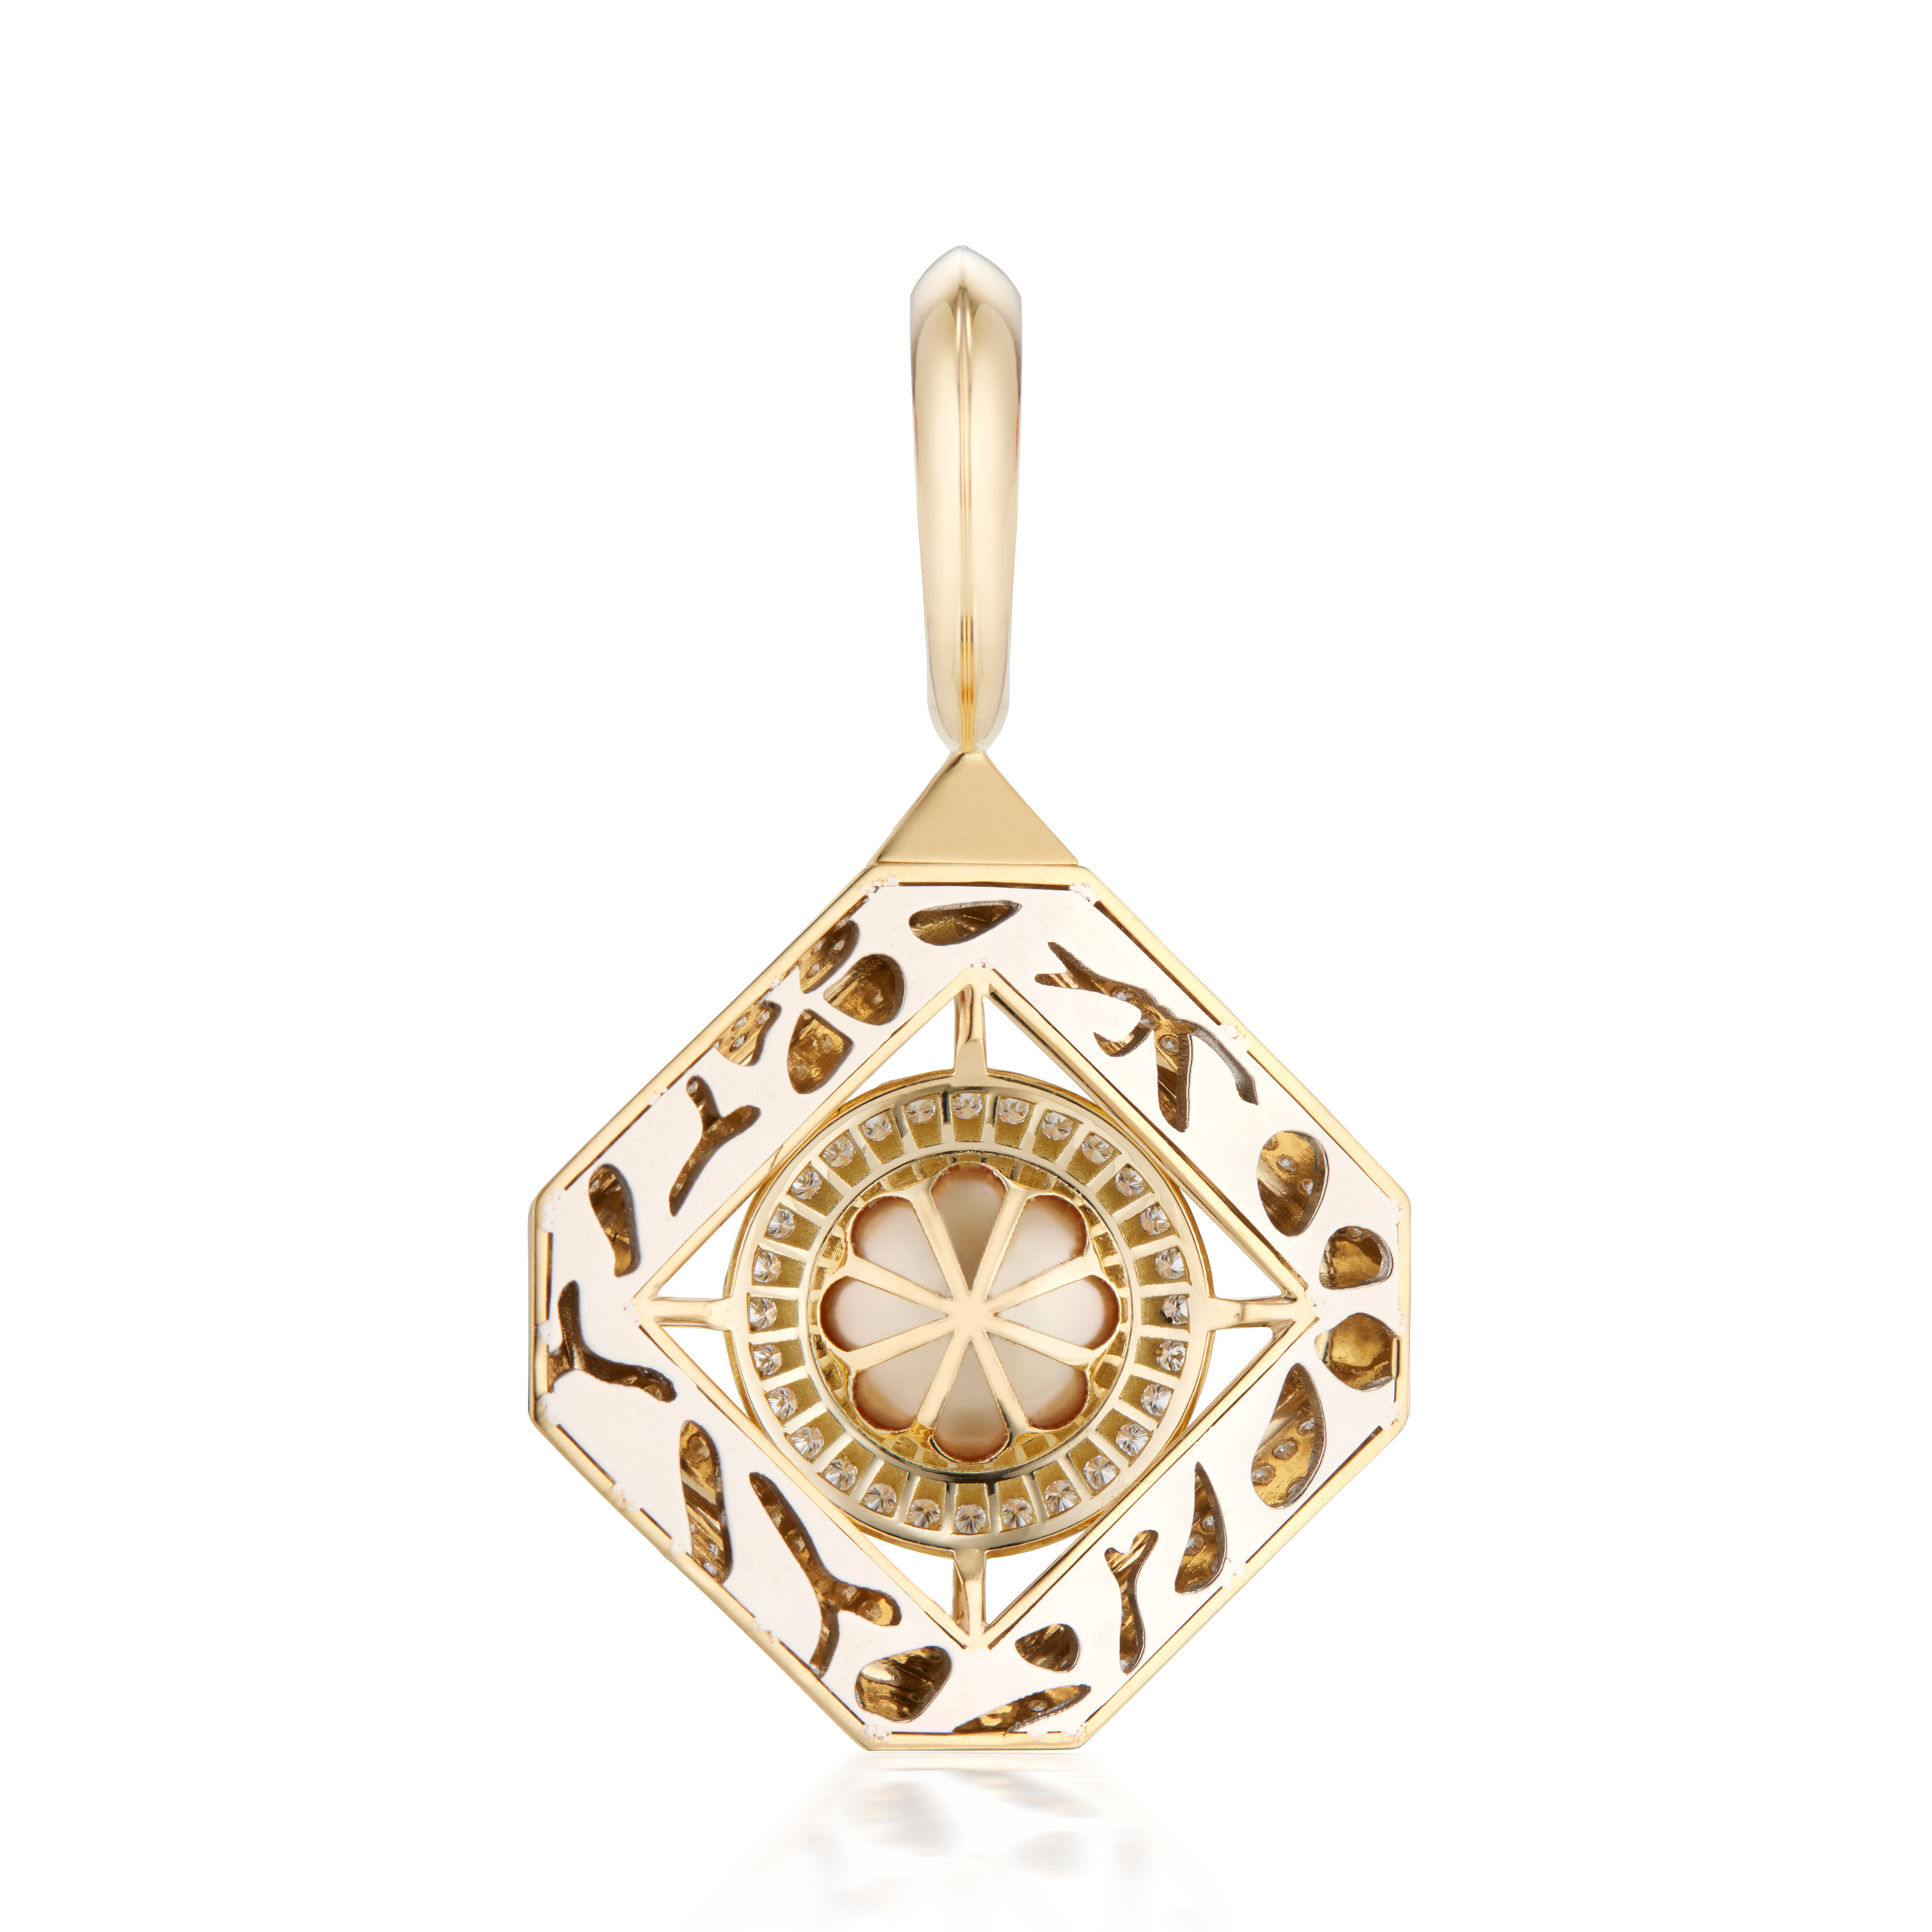 This is a picture of the back of the Renisis Guardian Gold Temple Pendant. There are very intricate designs including biomorphic cut outs and a round geometric setting for the large gold pearl